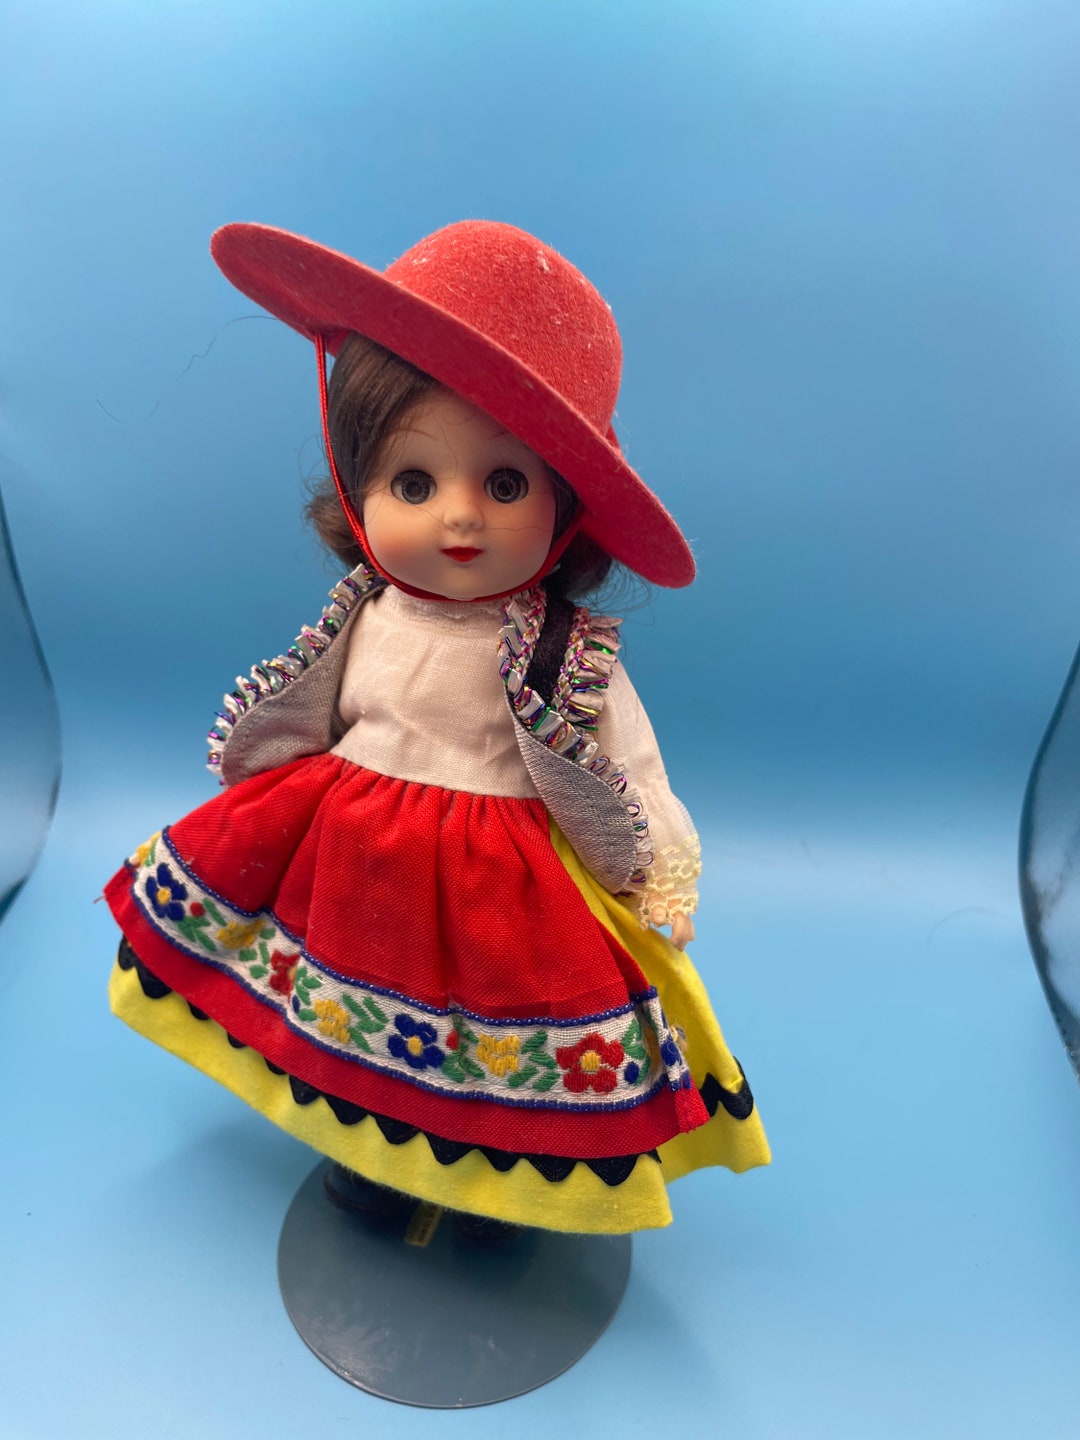 1977 Ginny Doll by Vogue Mexico Dolls of All Nations - Etsy